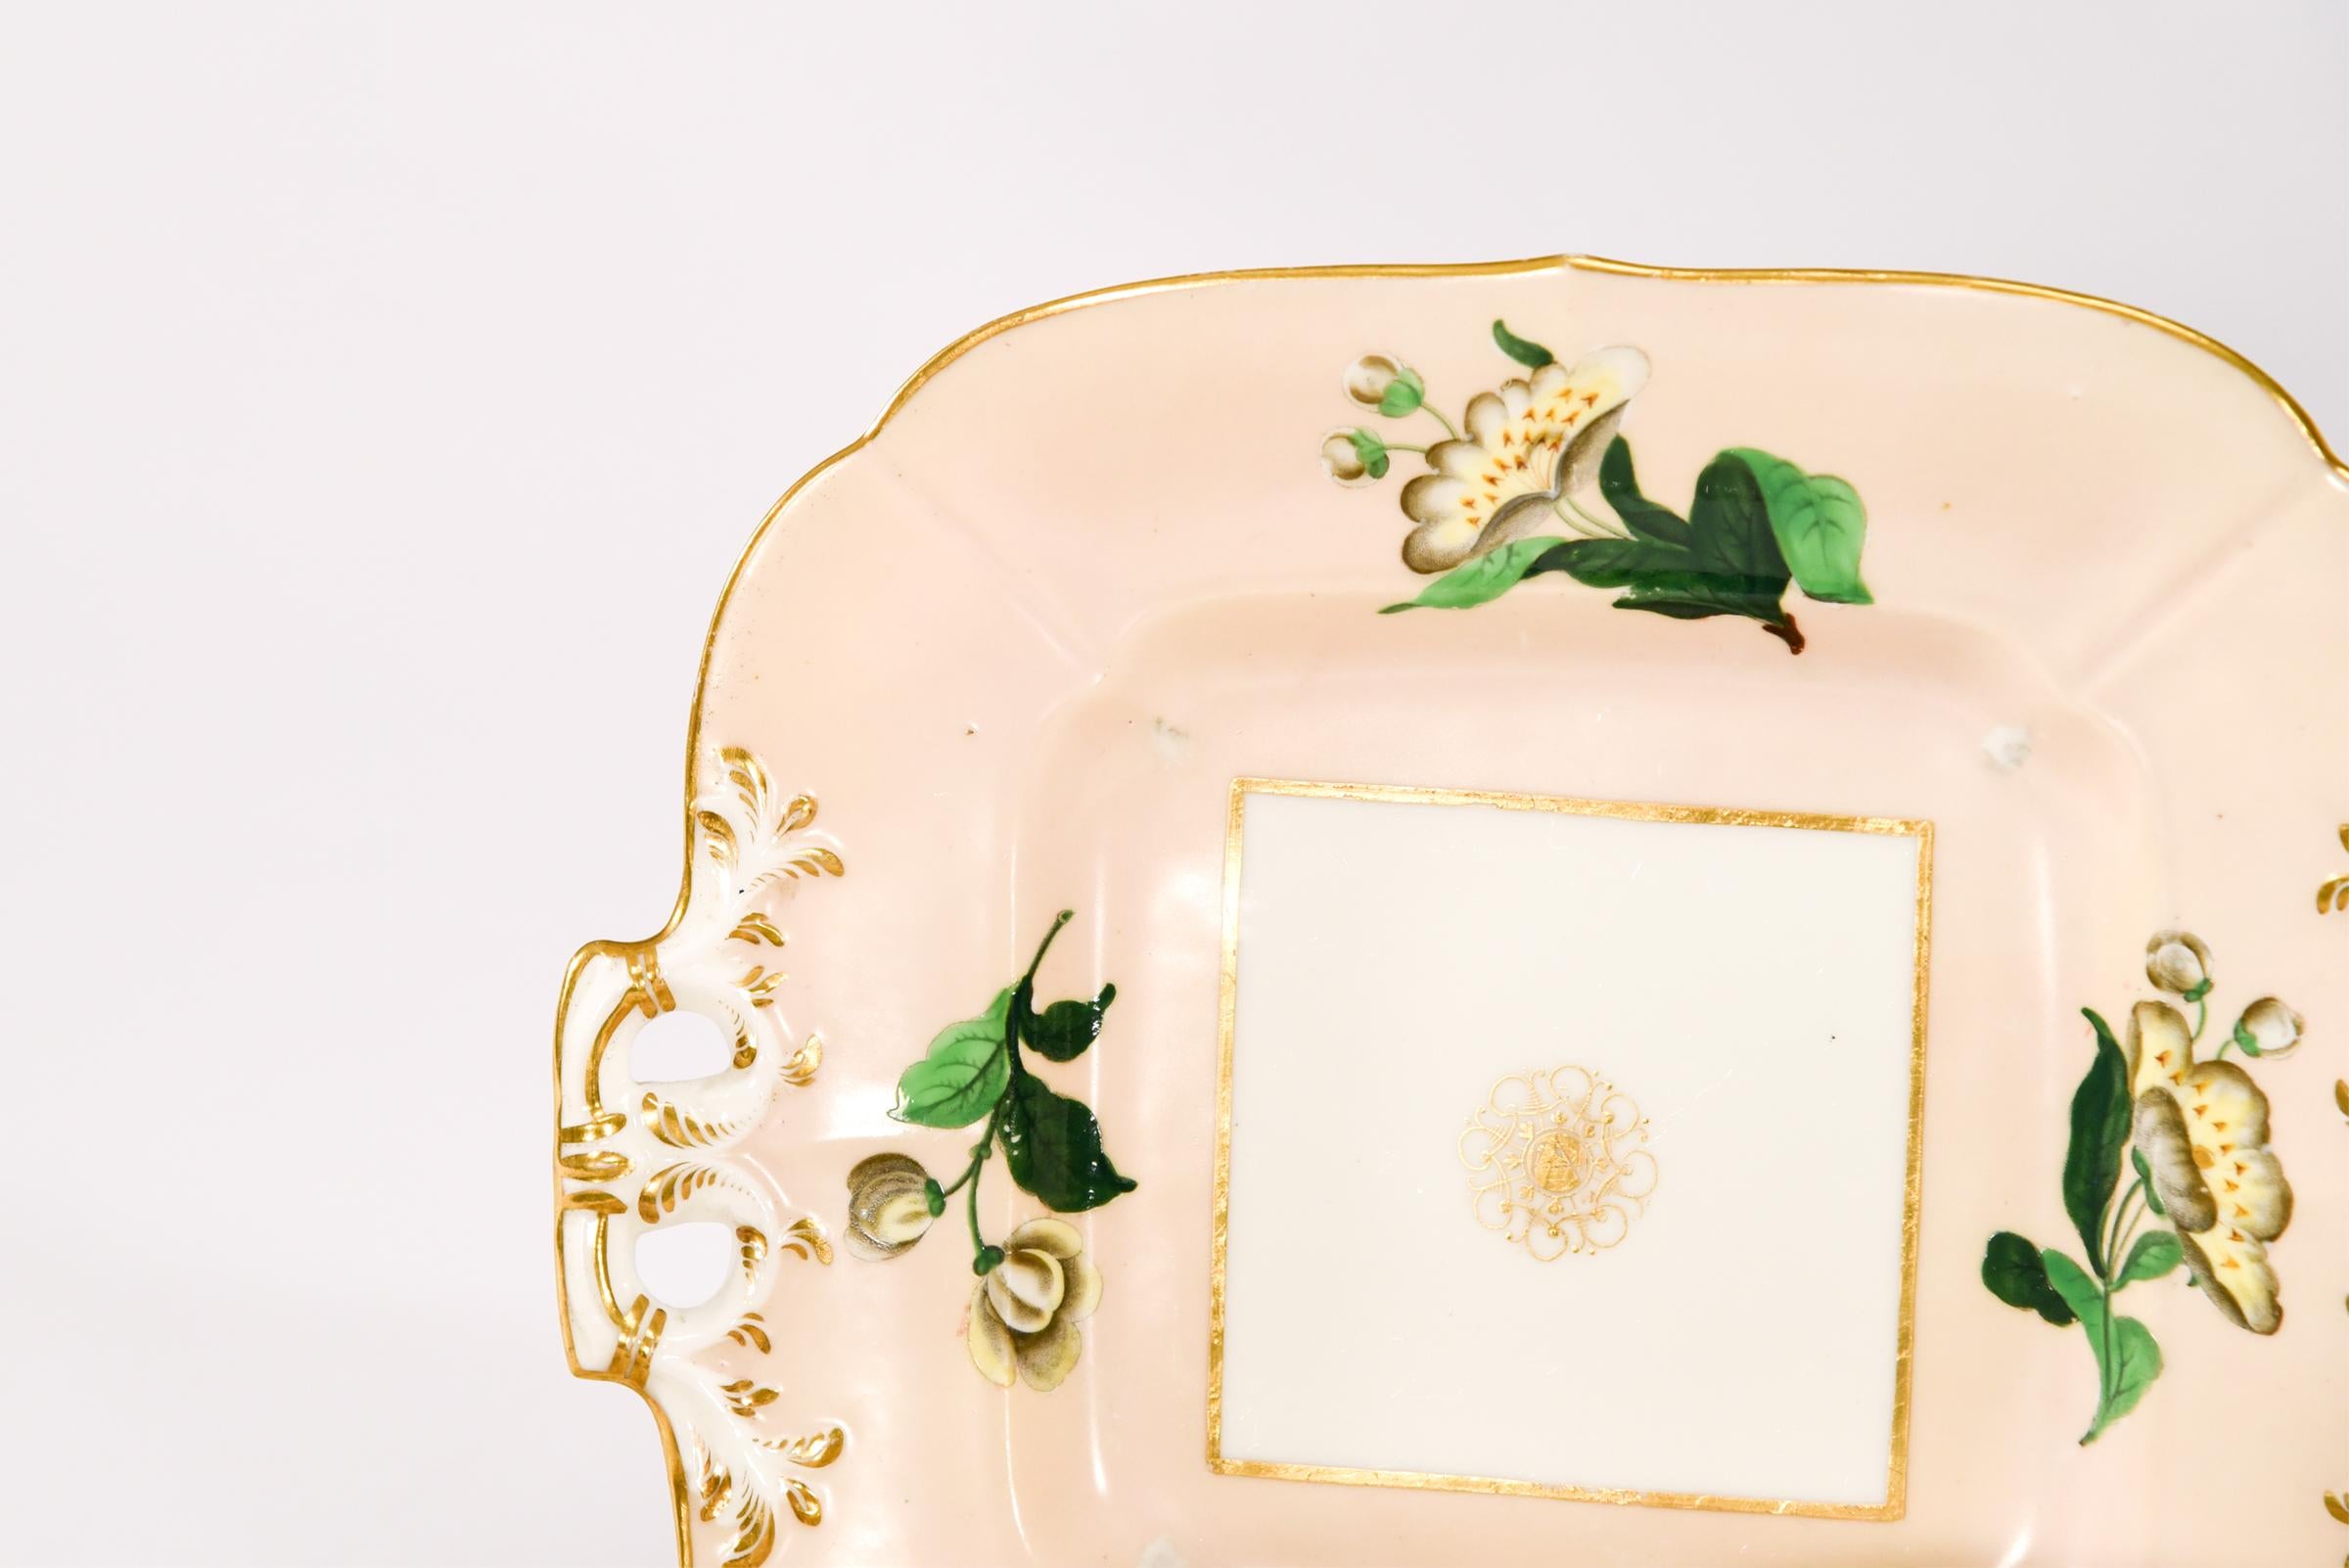 This Classic 19th century Spode Dessert and tea and coffee service encompasses the beauty of the period as well as the elegant floral decoration. The complete service for 8, plus extras is quite amazing, especially for the age, 44 pieces total.
It